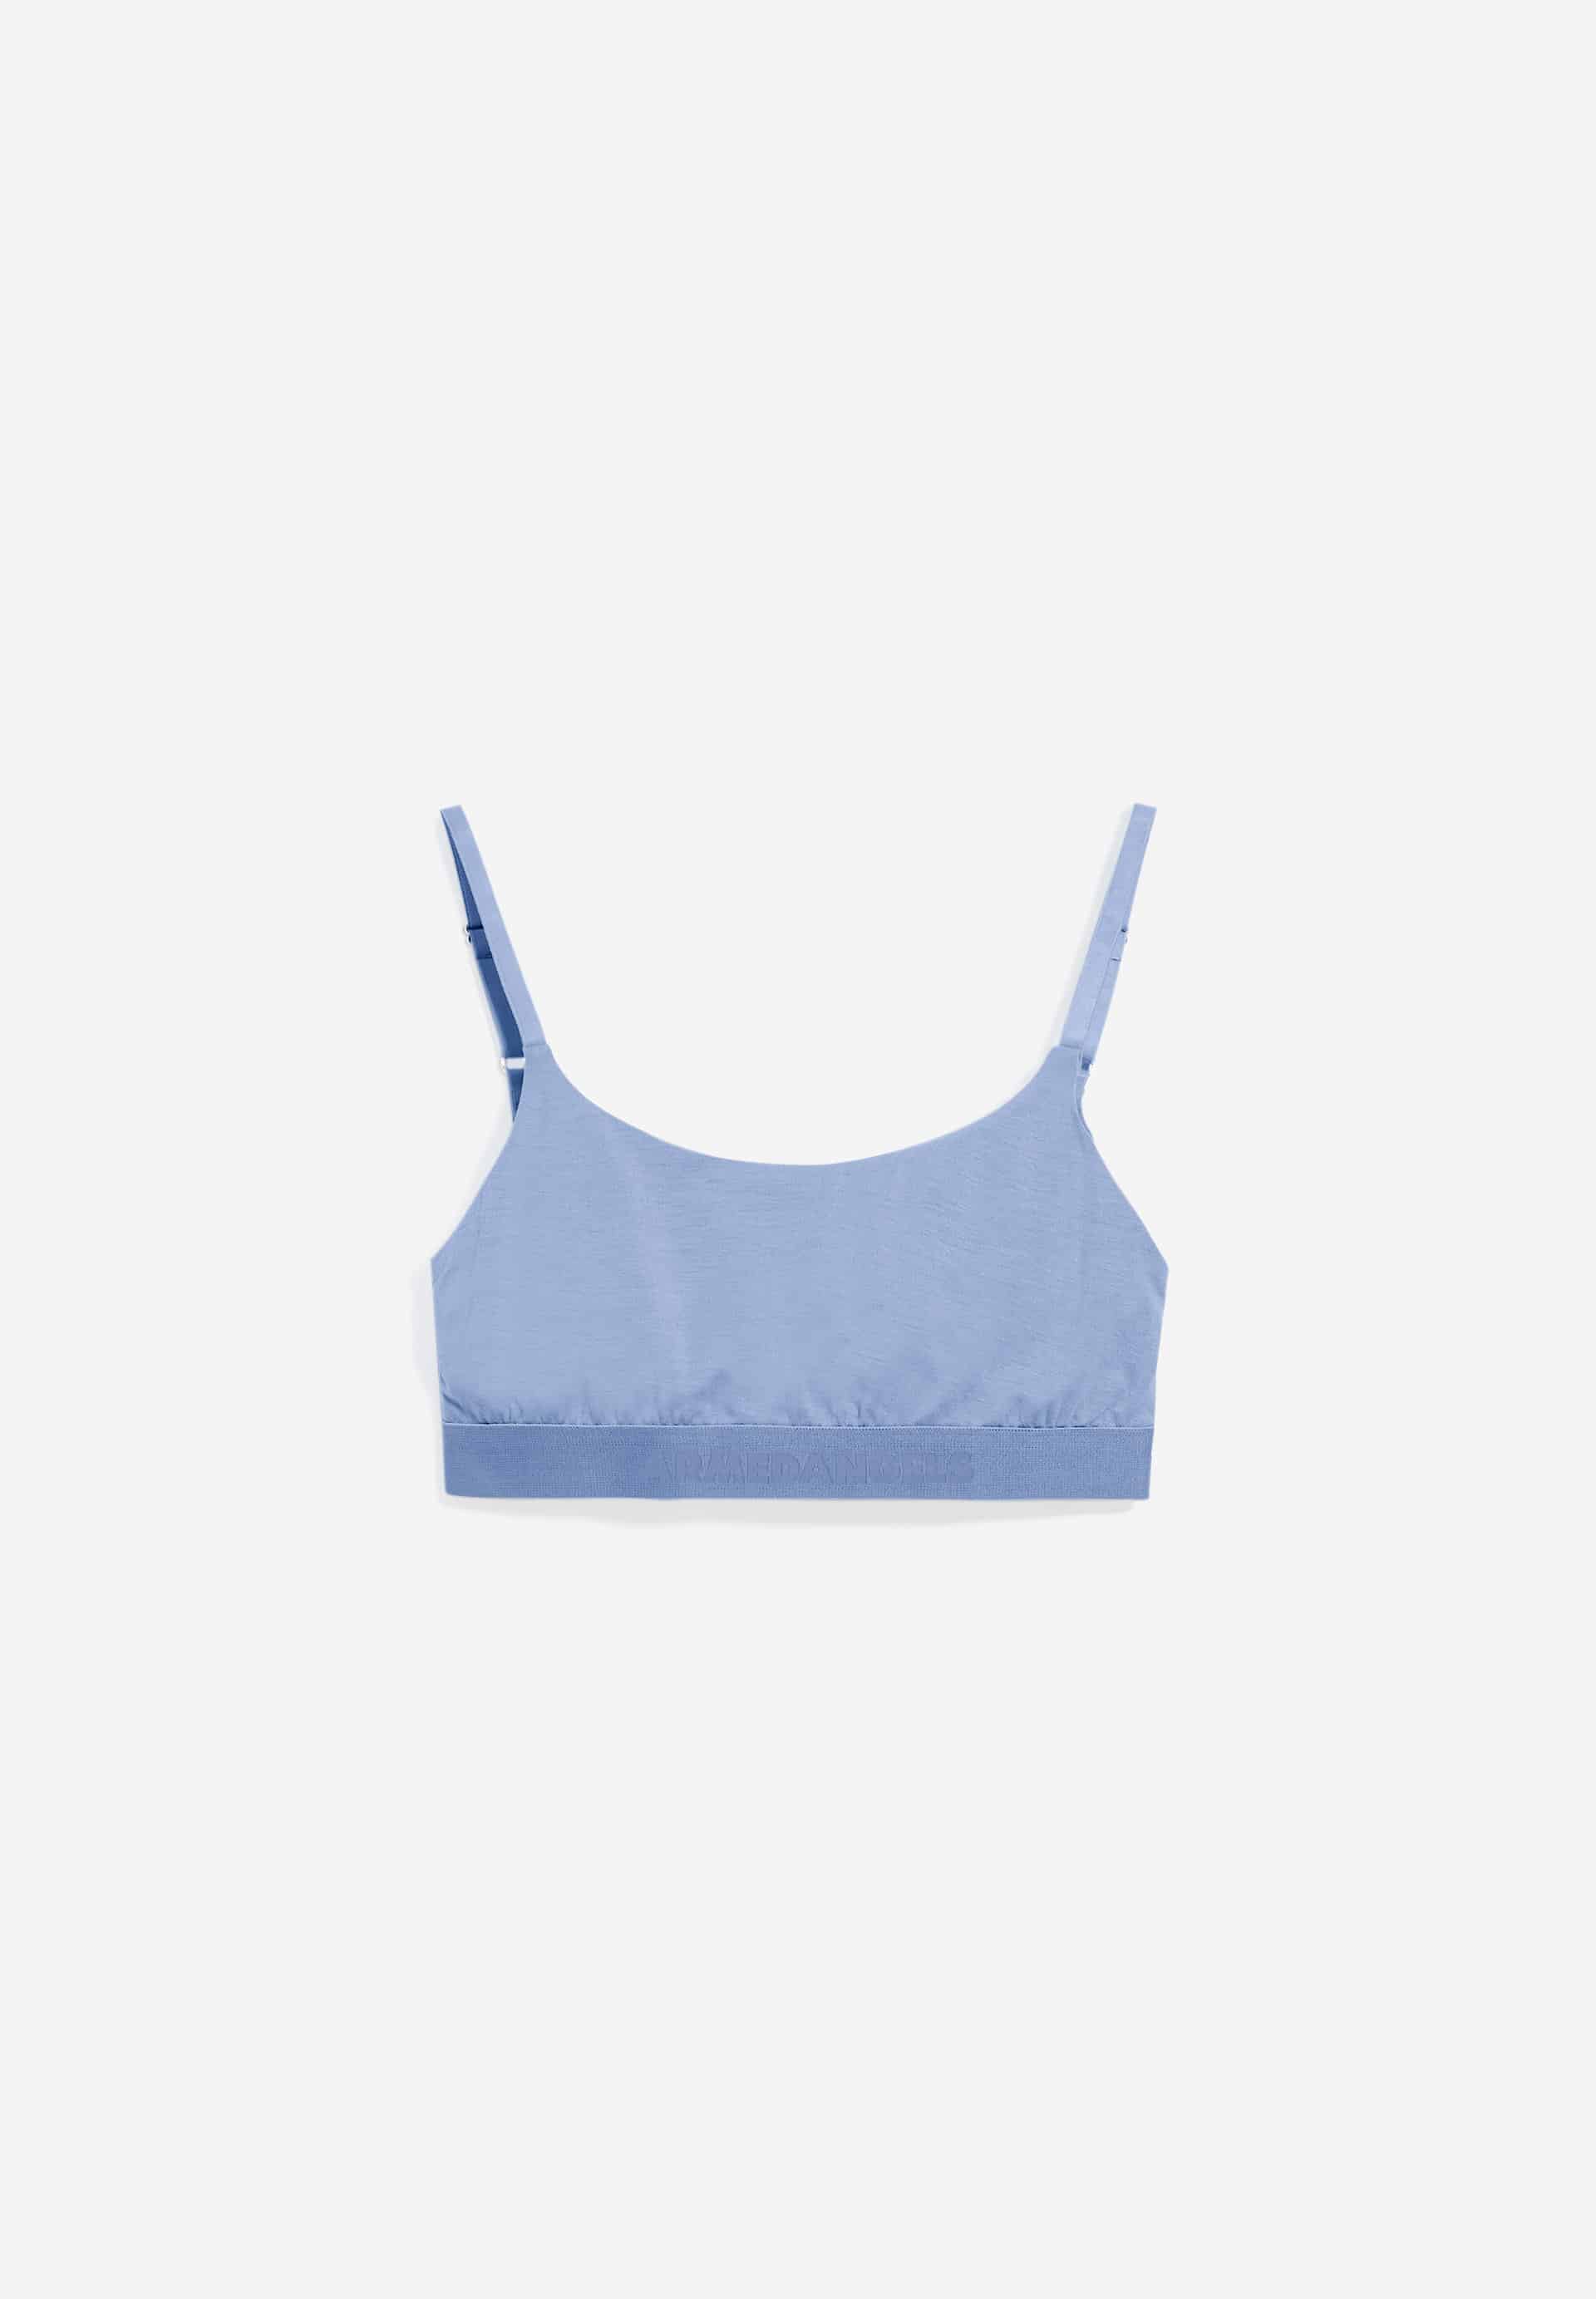 TOVAA Bralette made of TENCEL™ Modal Mix